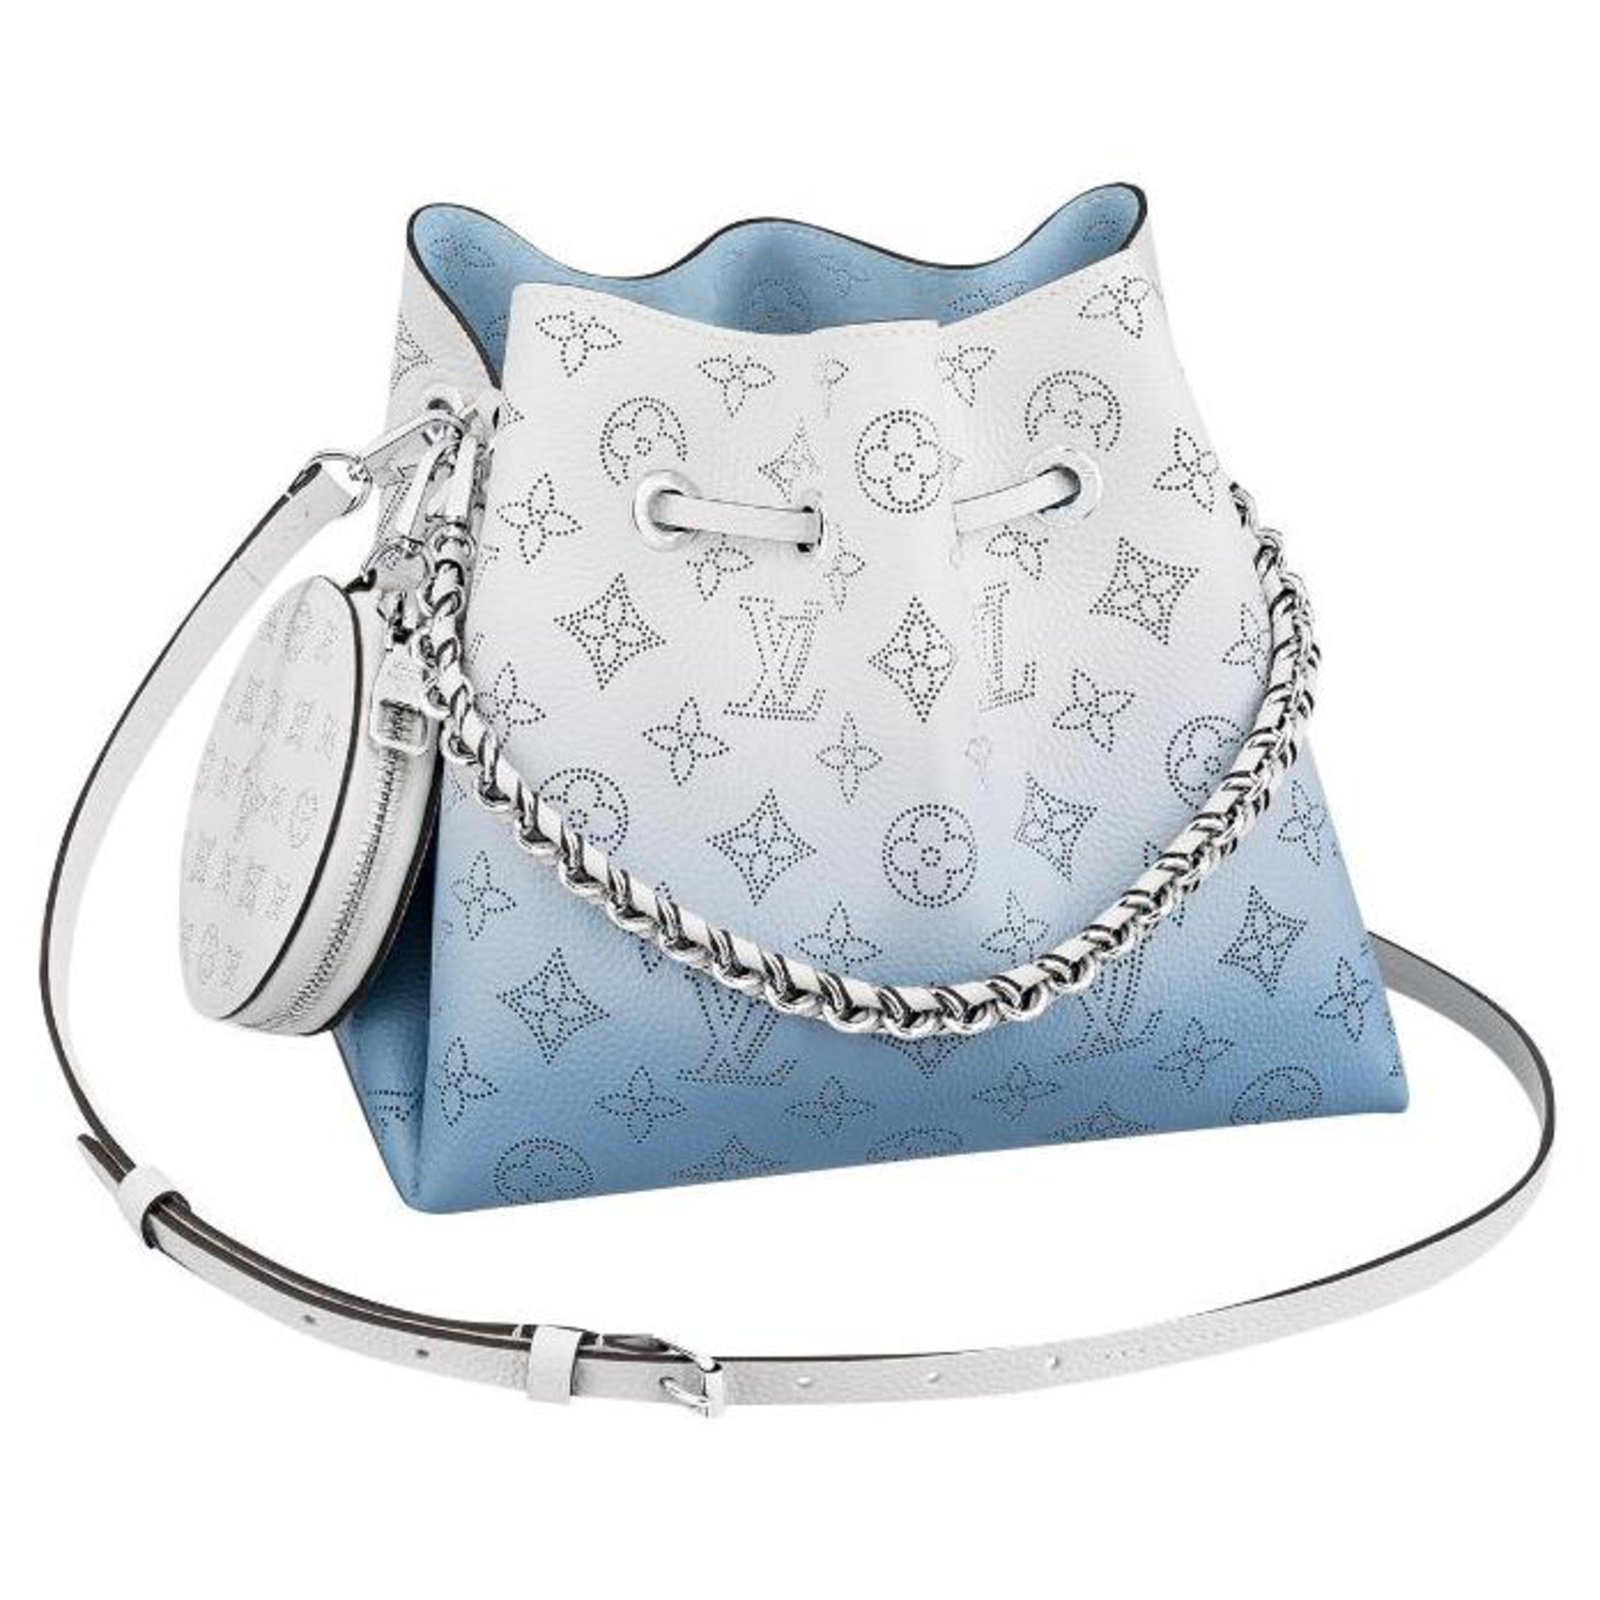 Meet The Latest Bucket Bag by Louis Vuitton - 2 in 1 Bella Mahina